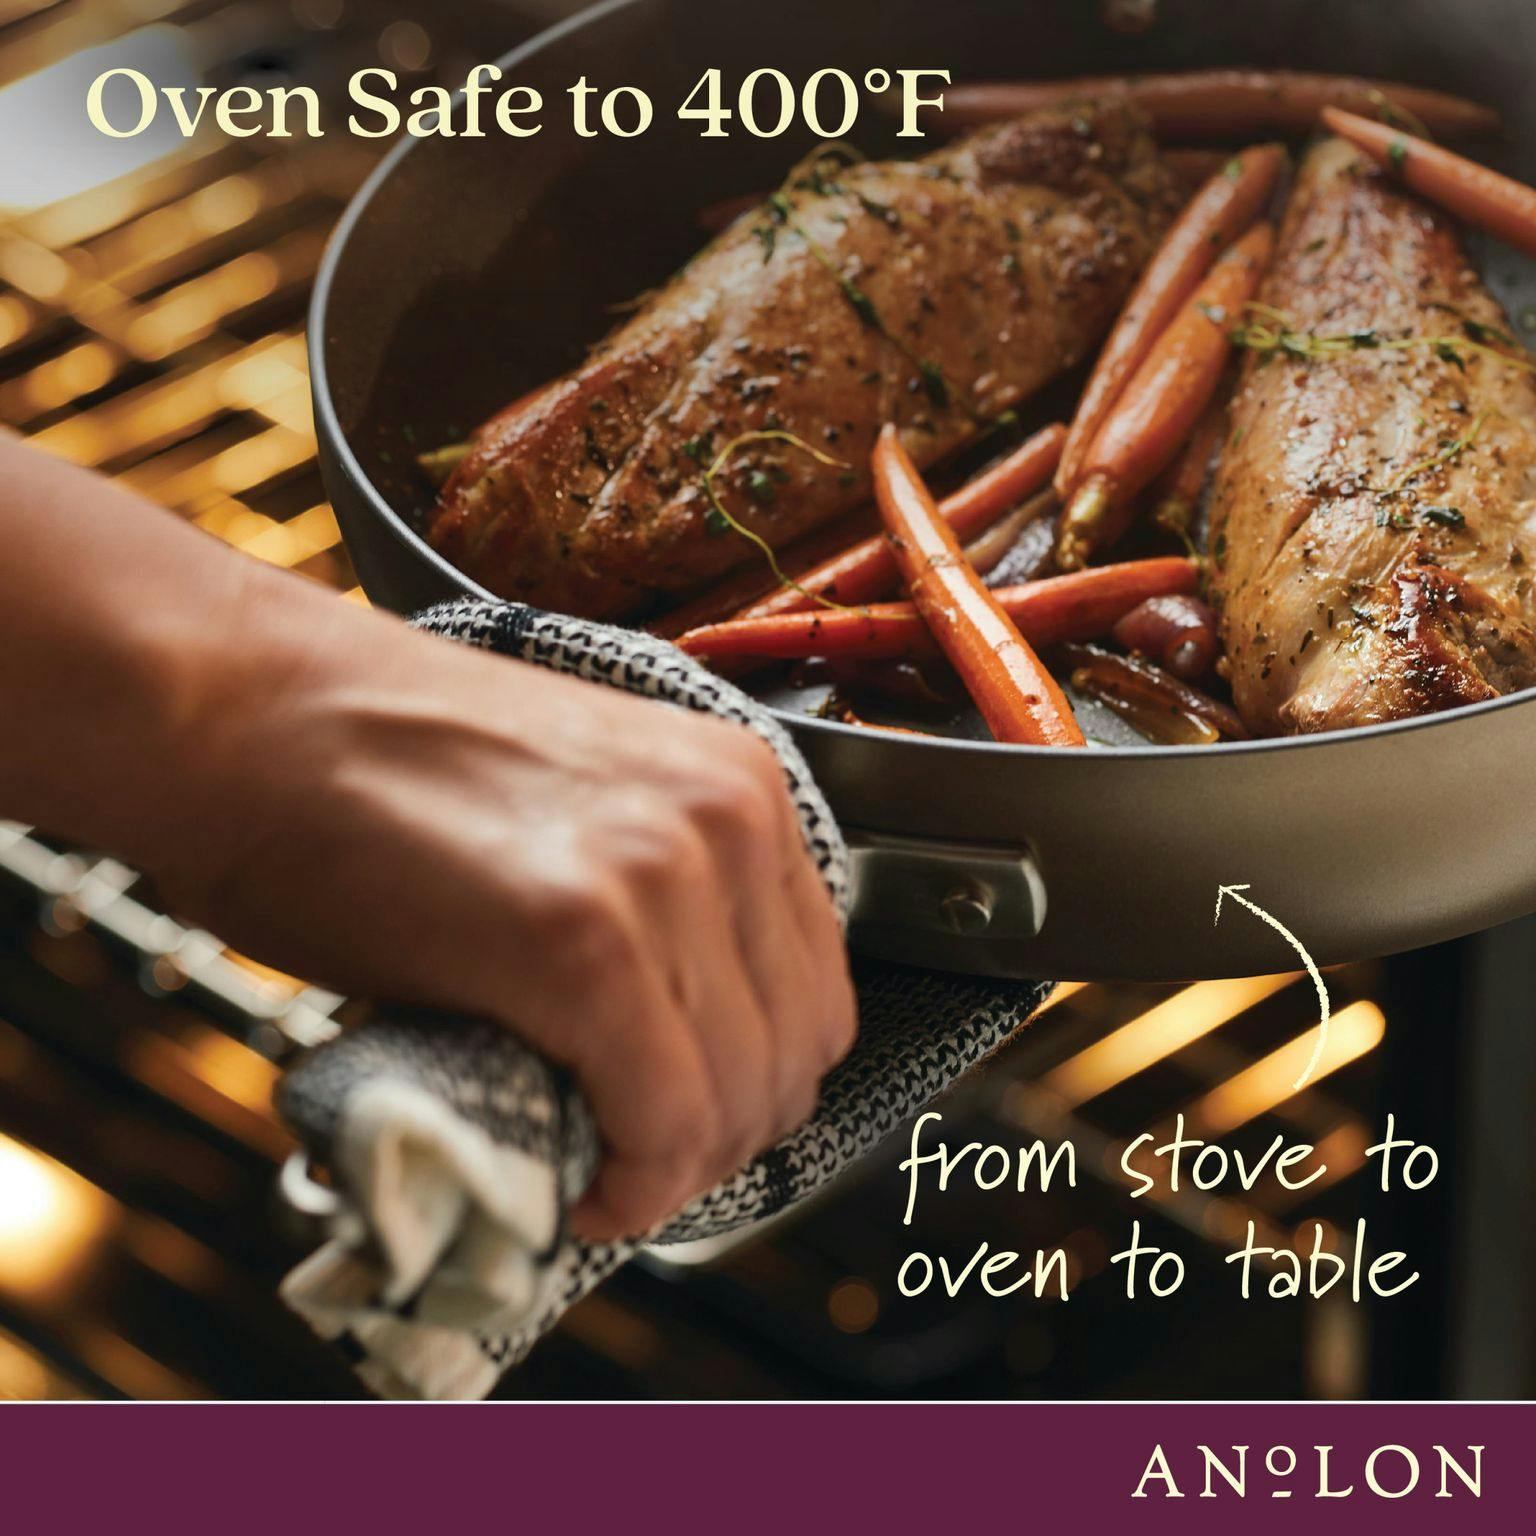 Anolon Advanced Home Hard-Anodized 8.5 Nonstick Skillet